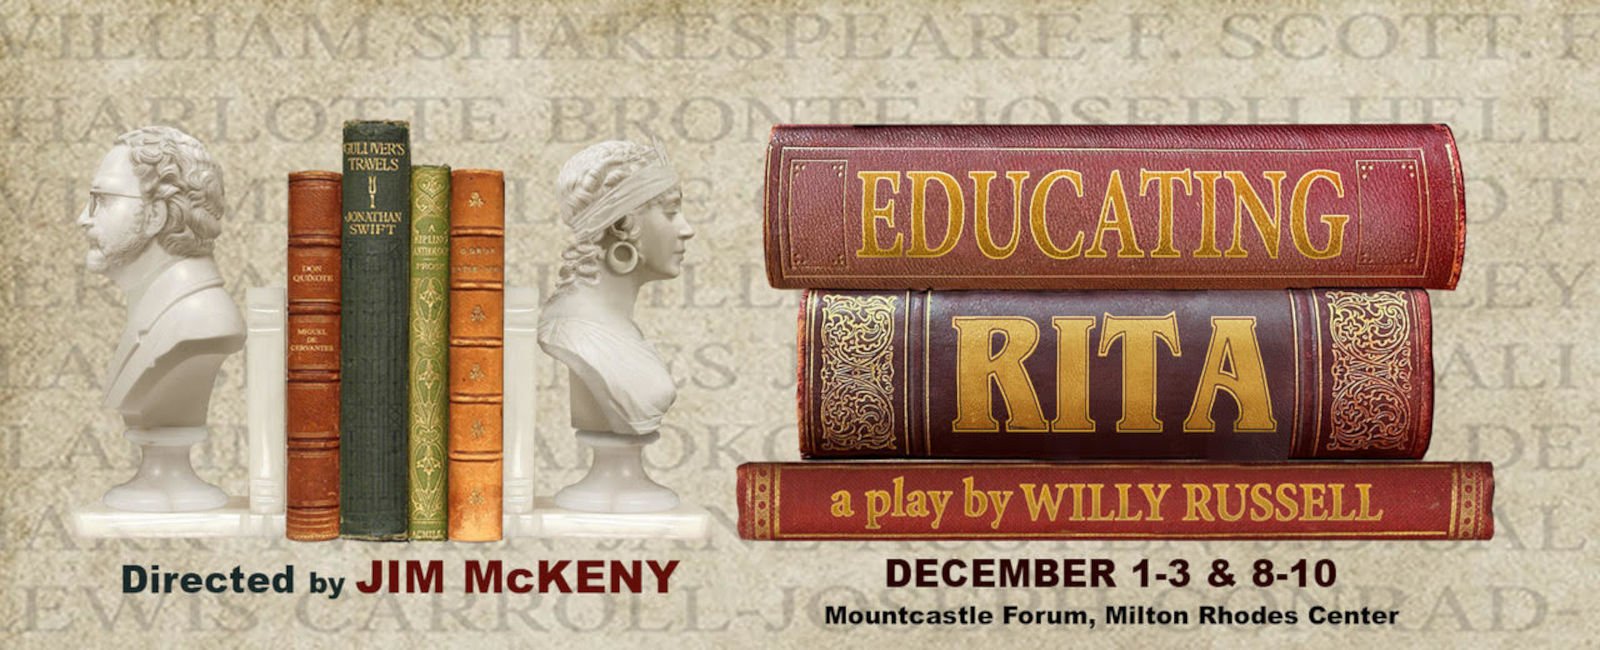 educating rita presented by 40+ stage company